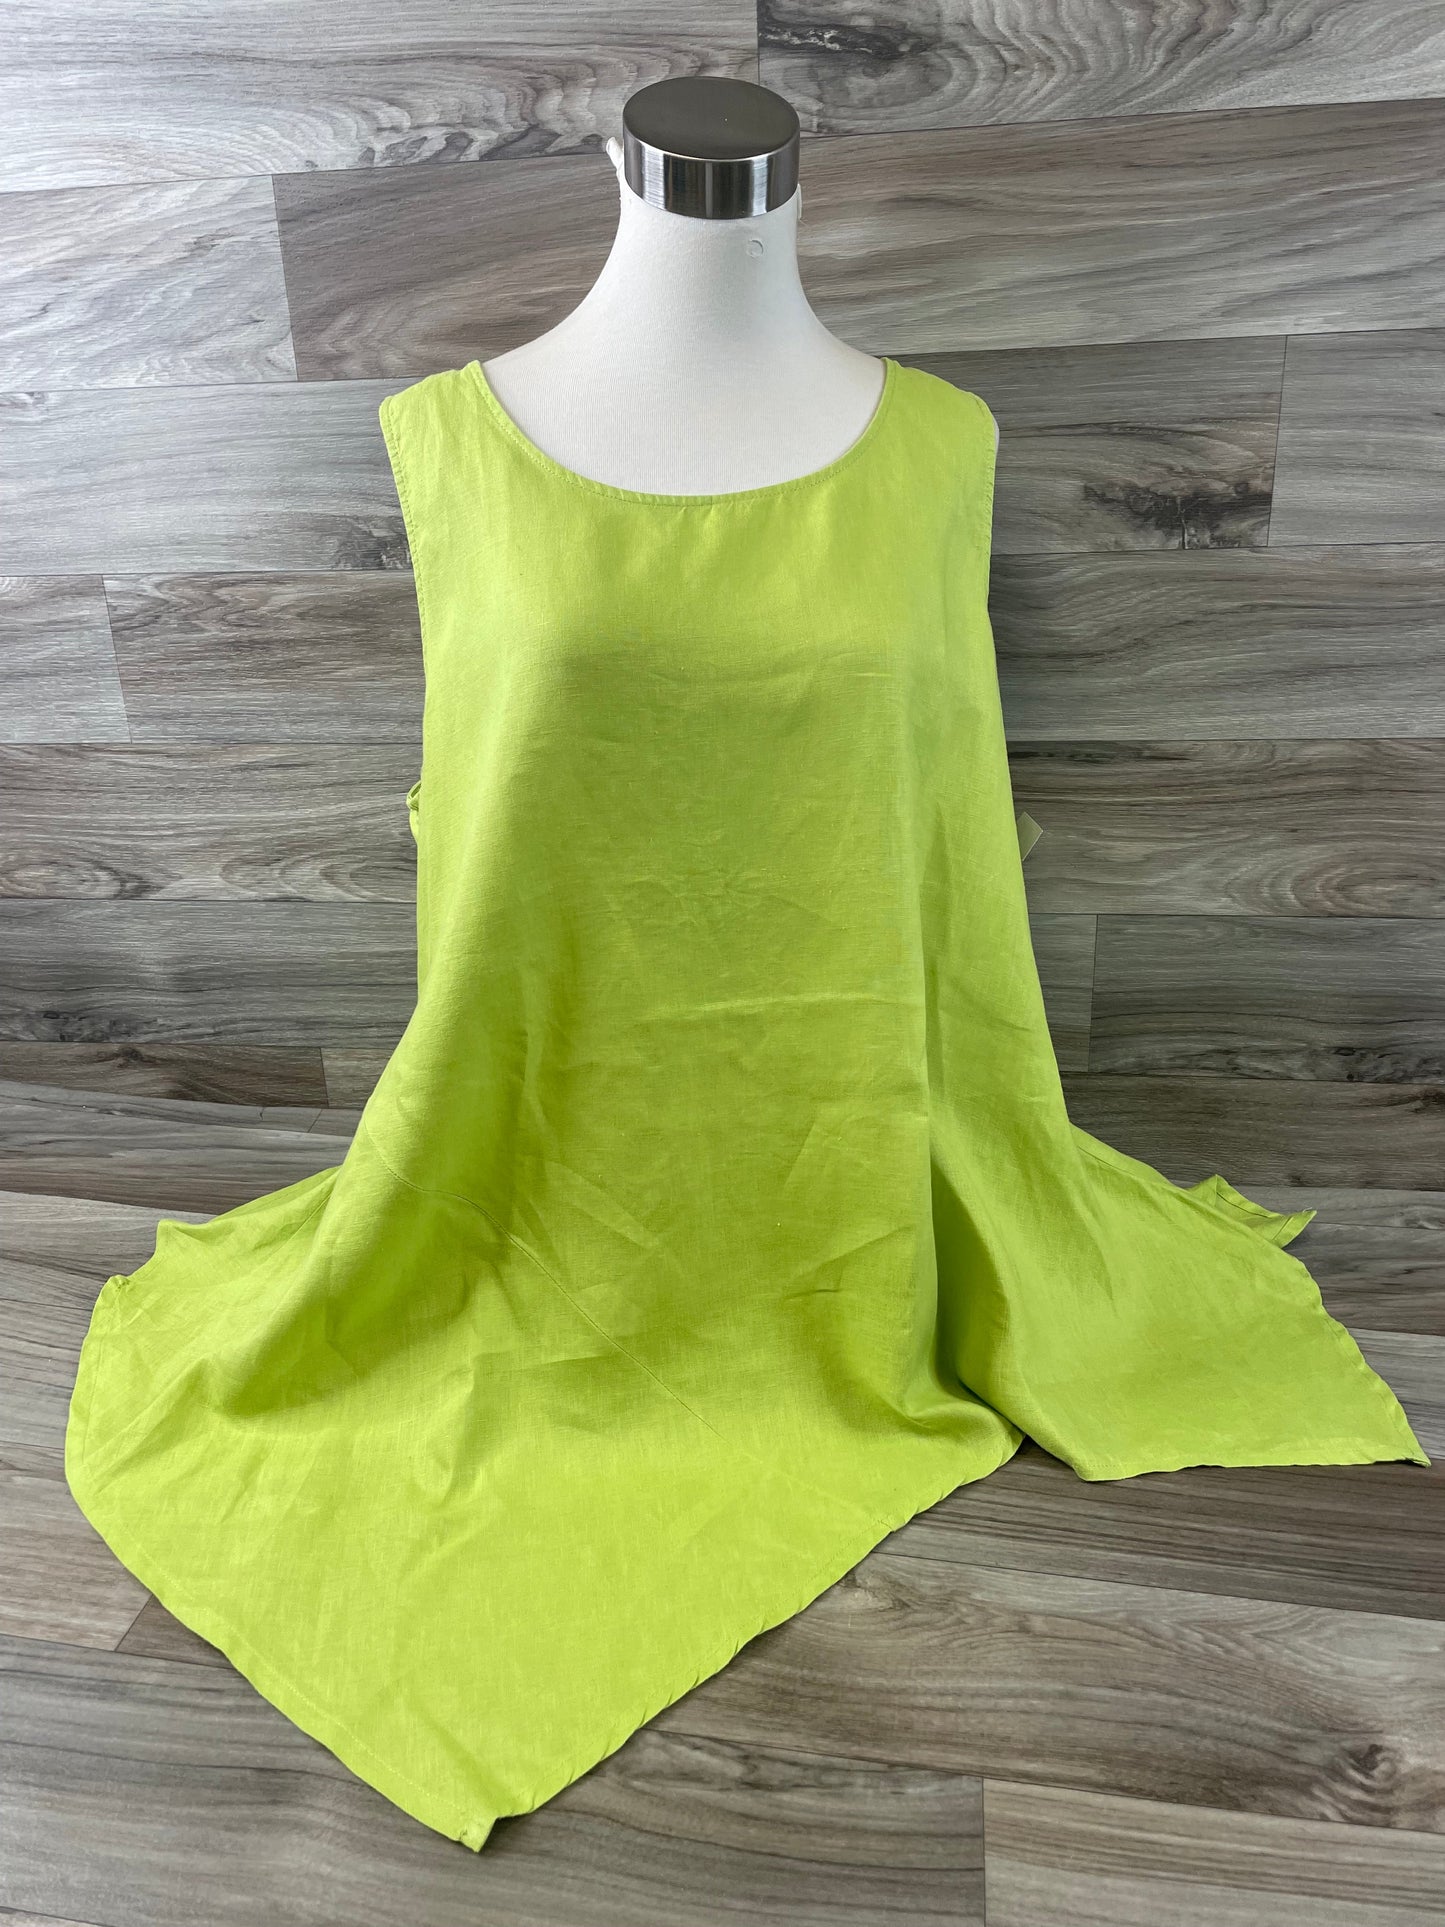 Green Top Sleeveless For Cynthia, Size Large